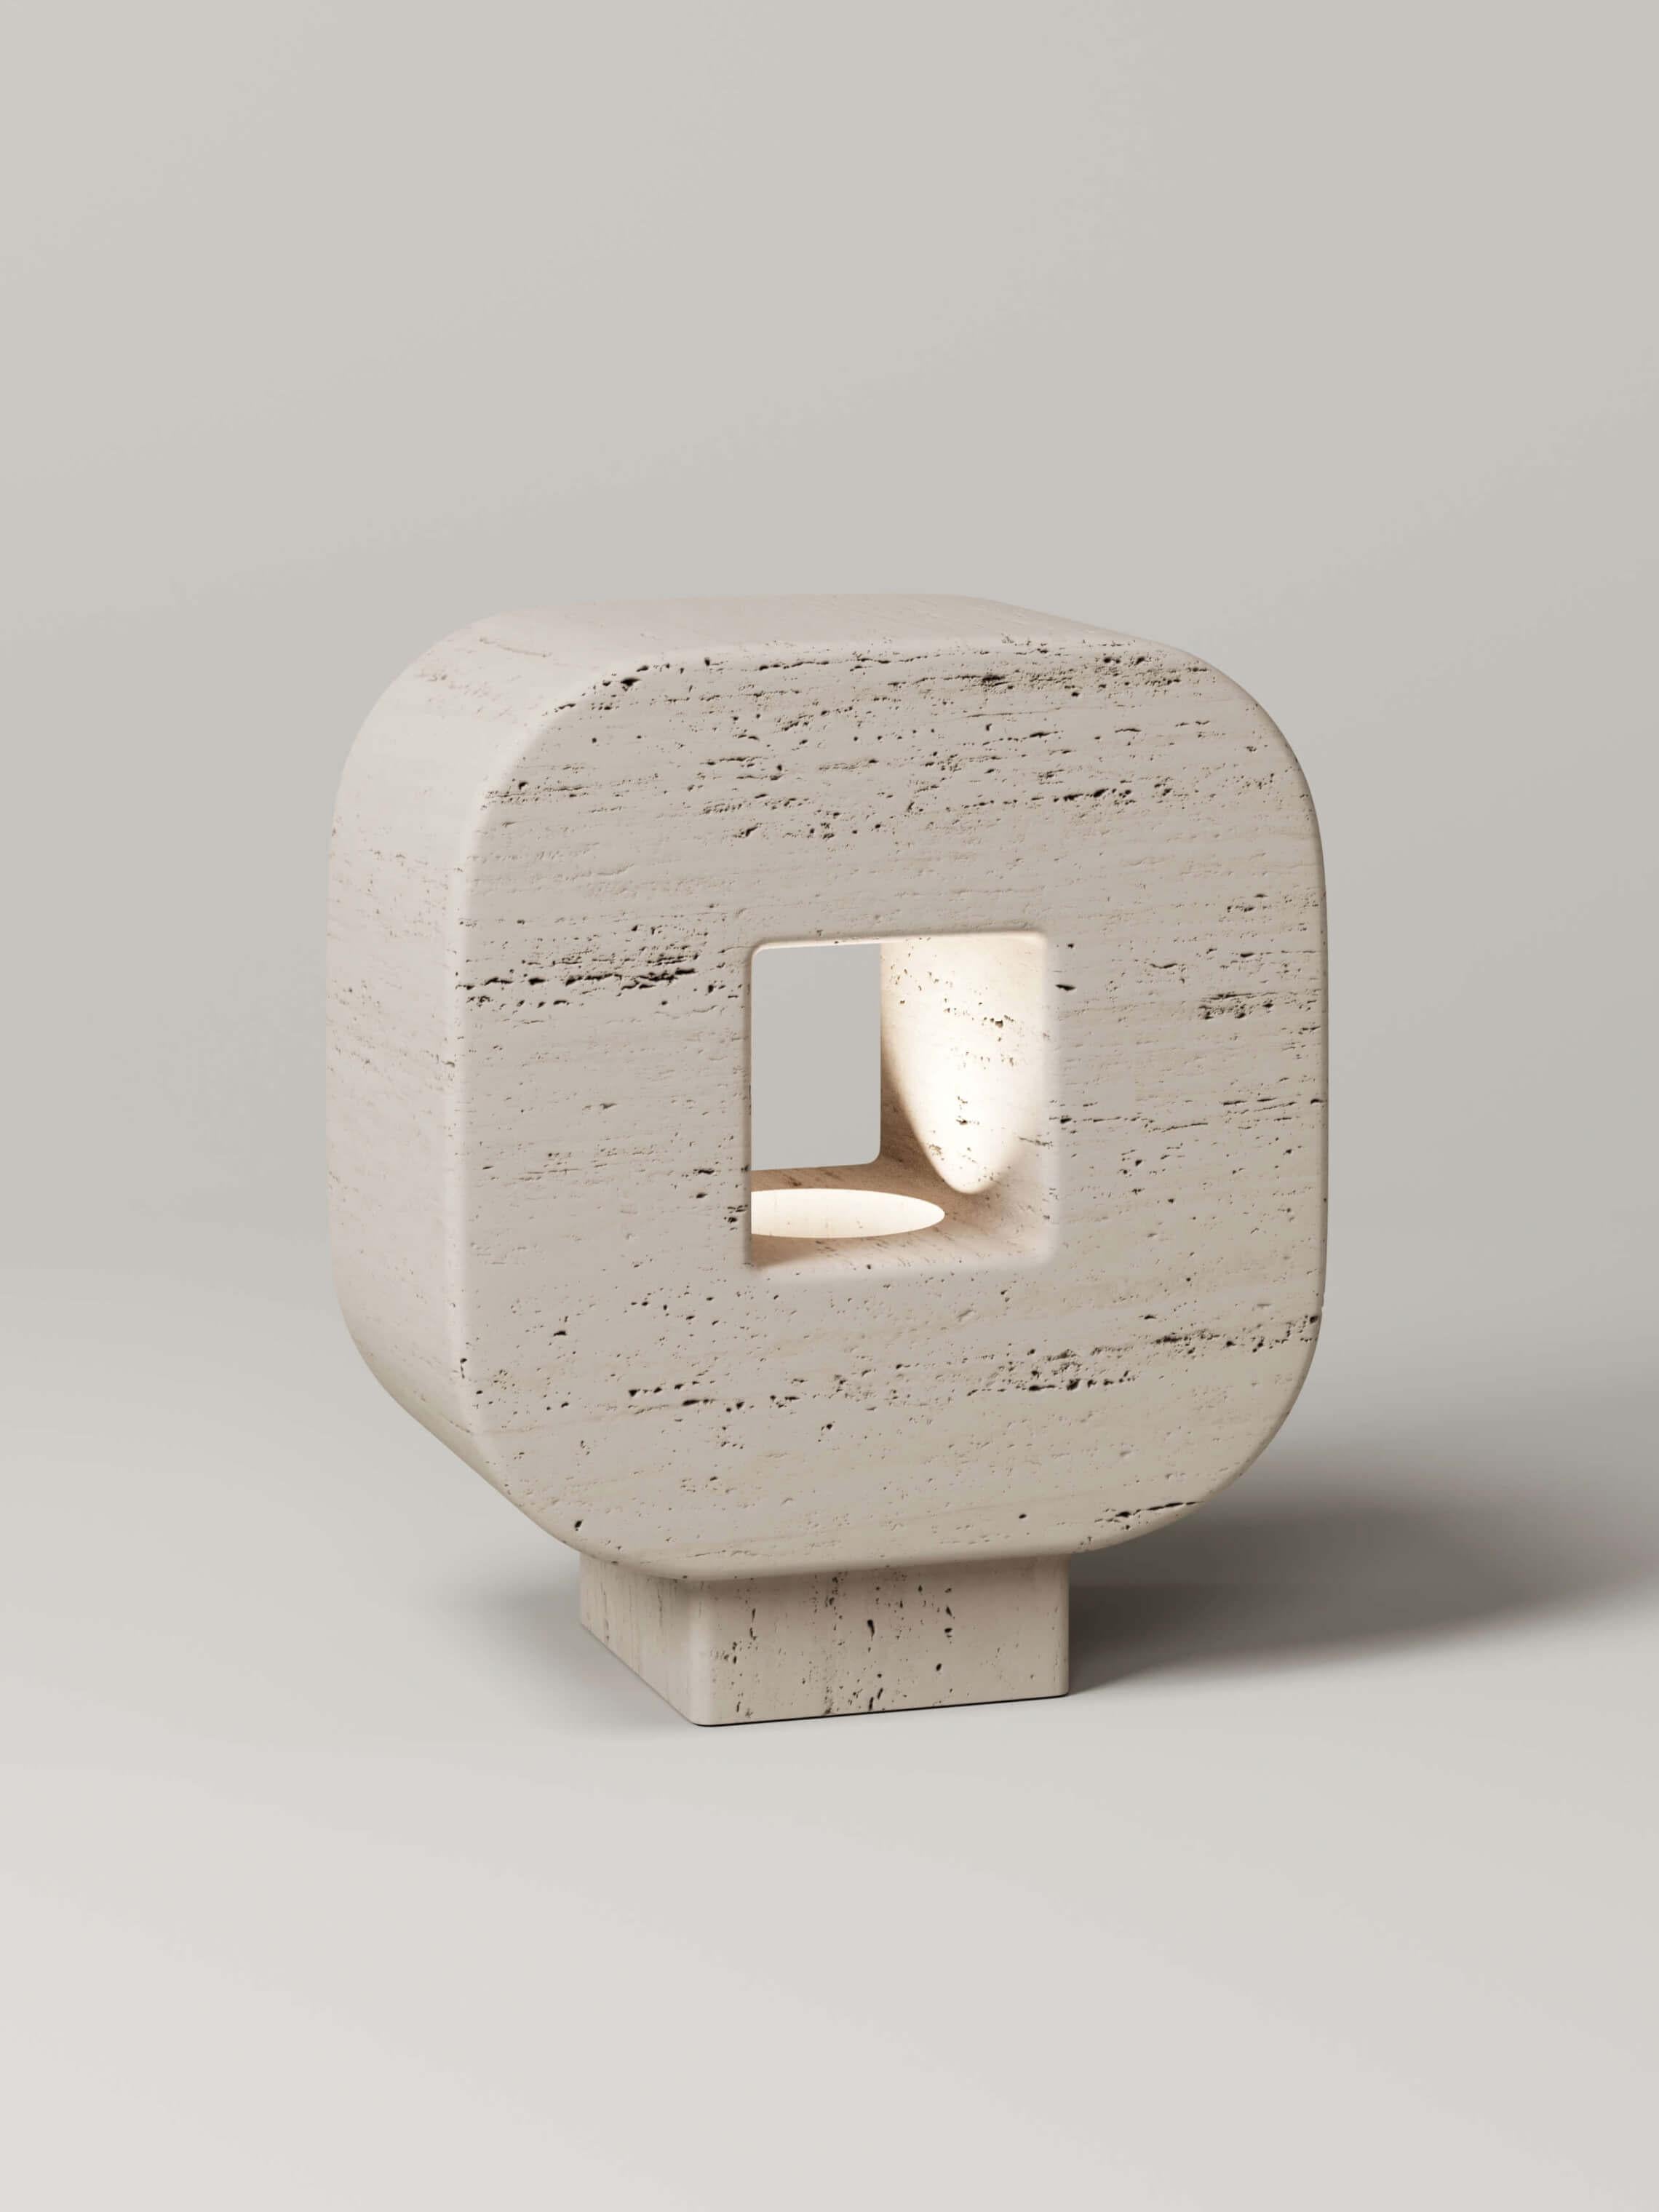 M_004 Travertine Table Lamp by Monolith Studio
Signed and Numbered.
Dimensions: D 20 x W 37 x H 42 cm.
Materials: Travertine. 

Available in travertine, onyx and lava rock. All our lamps can be wired according to each country. If sold to the USA it